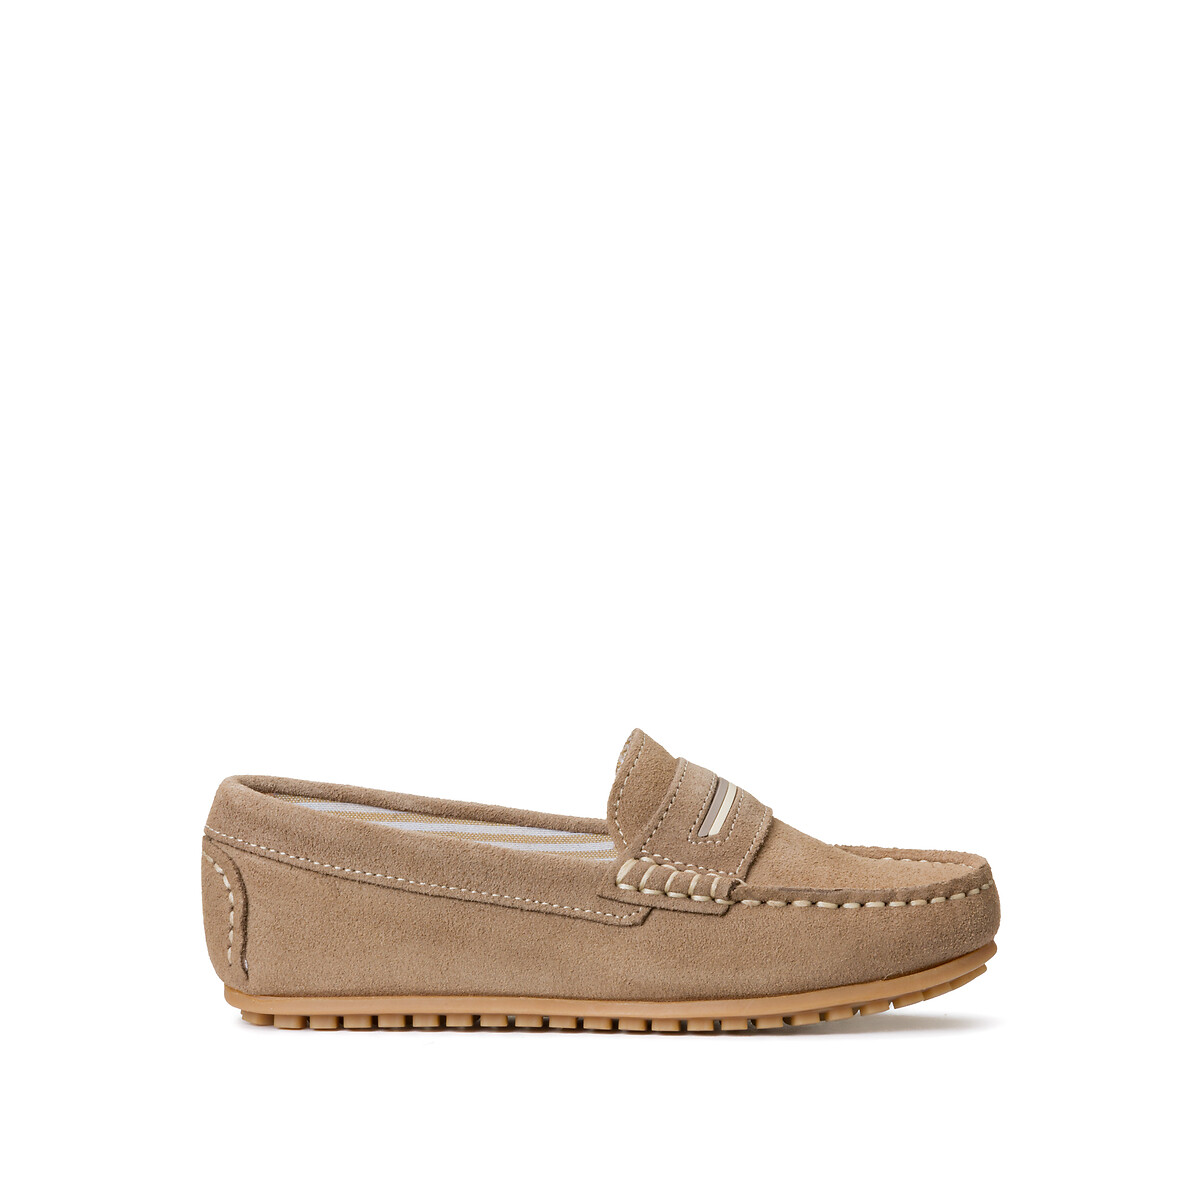 Kids suede loafers La Redoute Collections | La Redoute